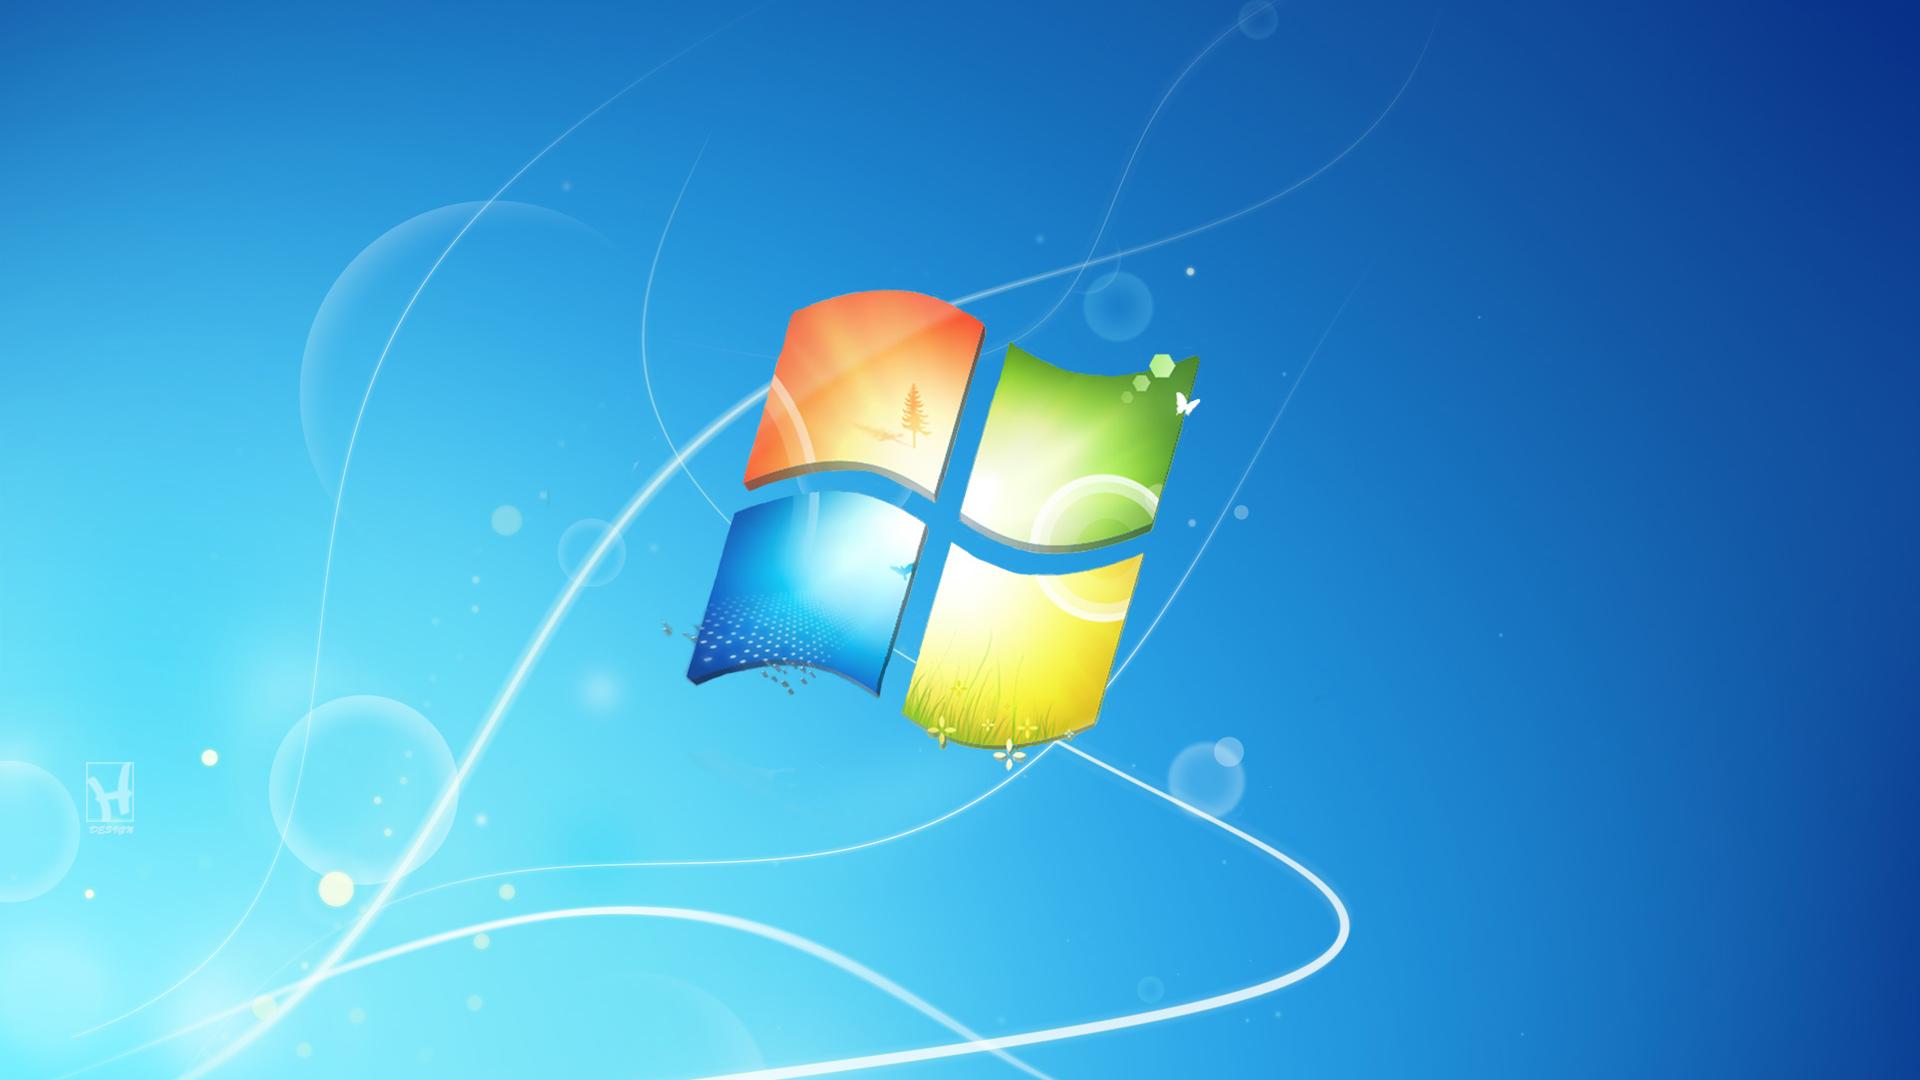 Background Windows Xp System Widescreen And HD Wallpaper